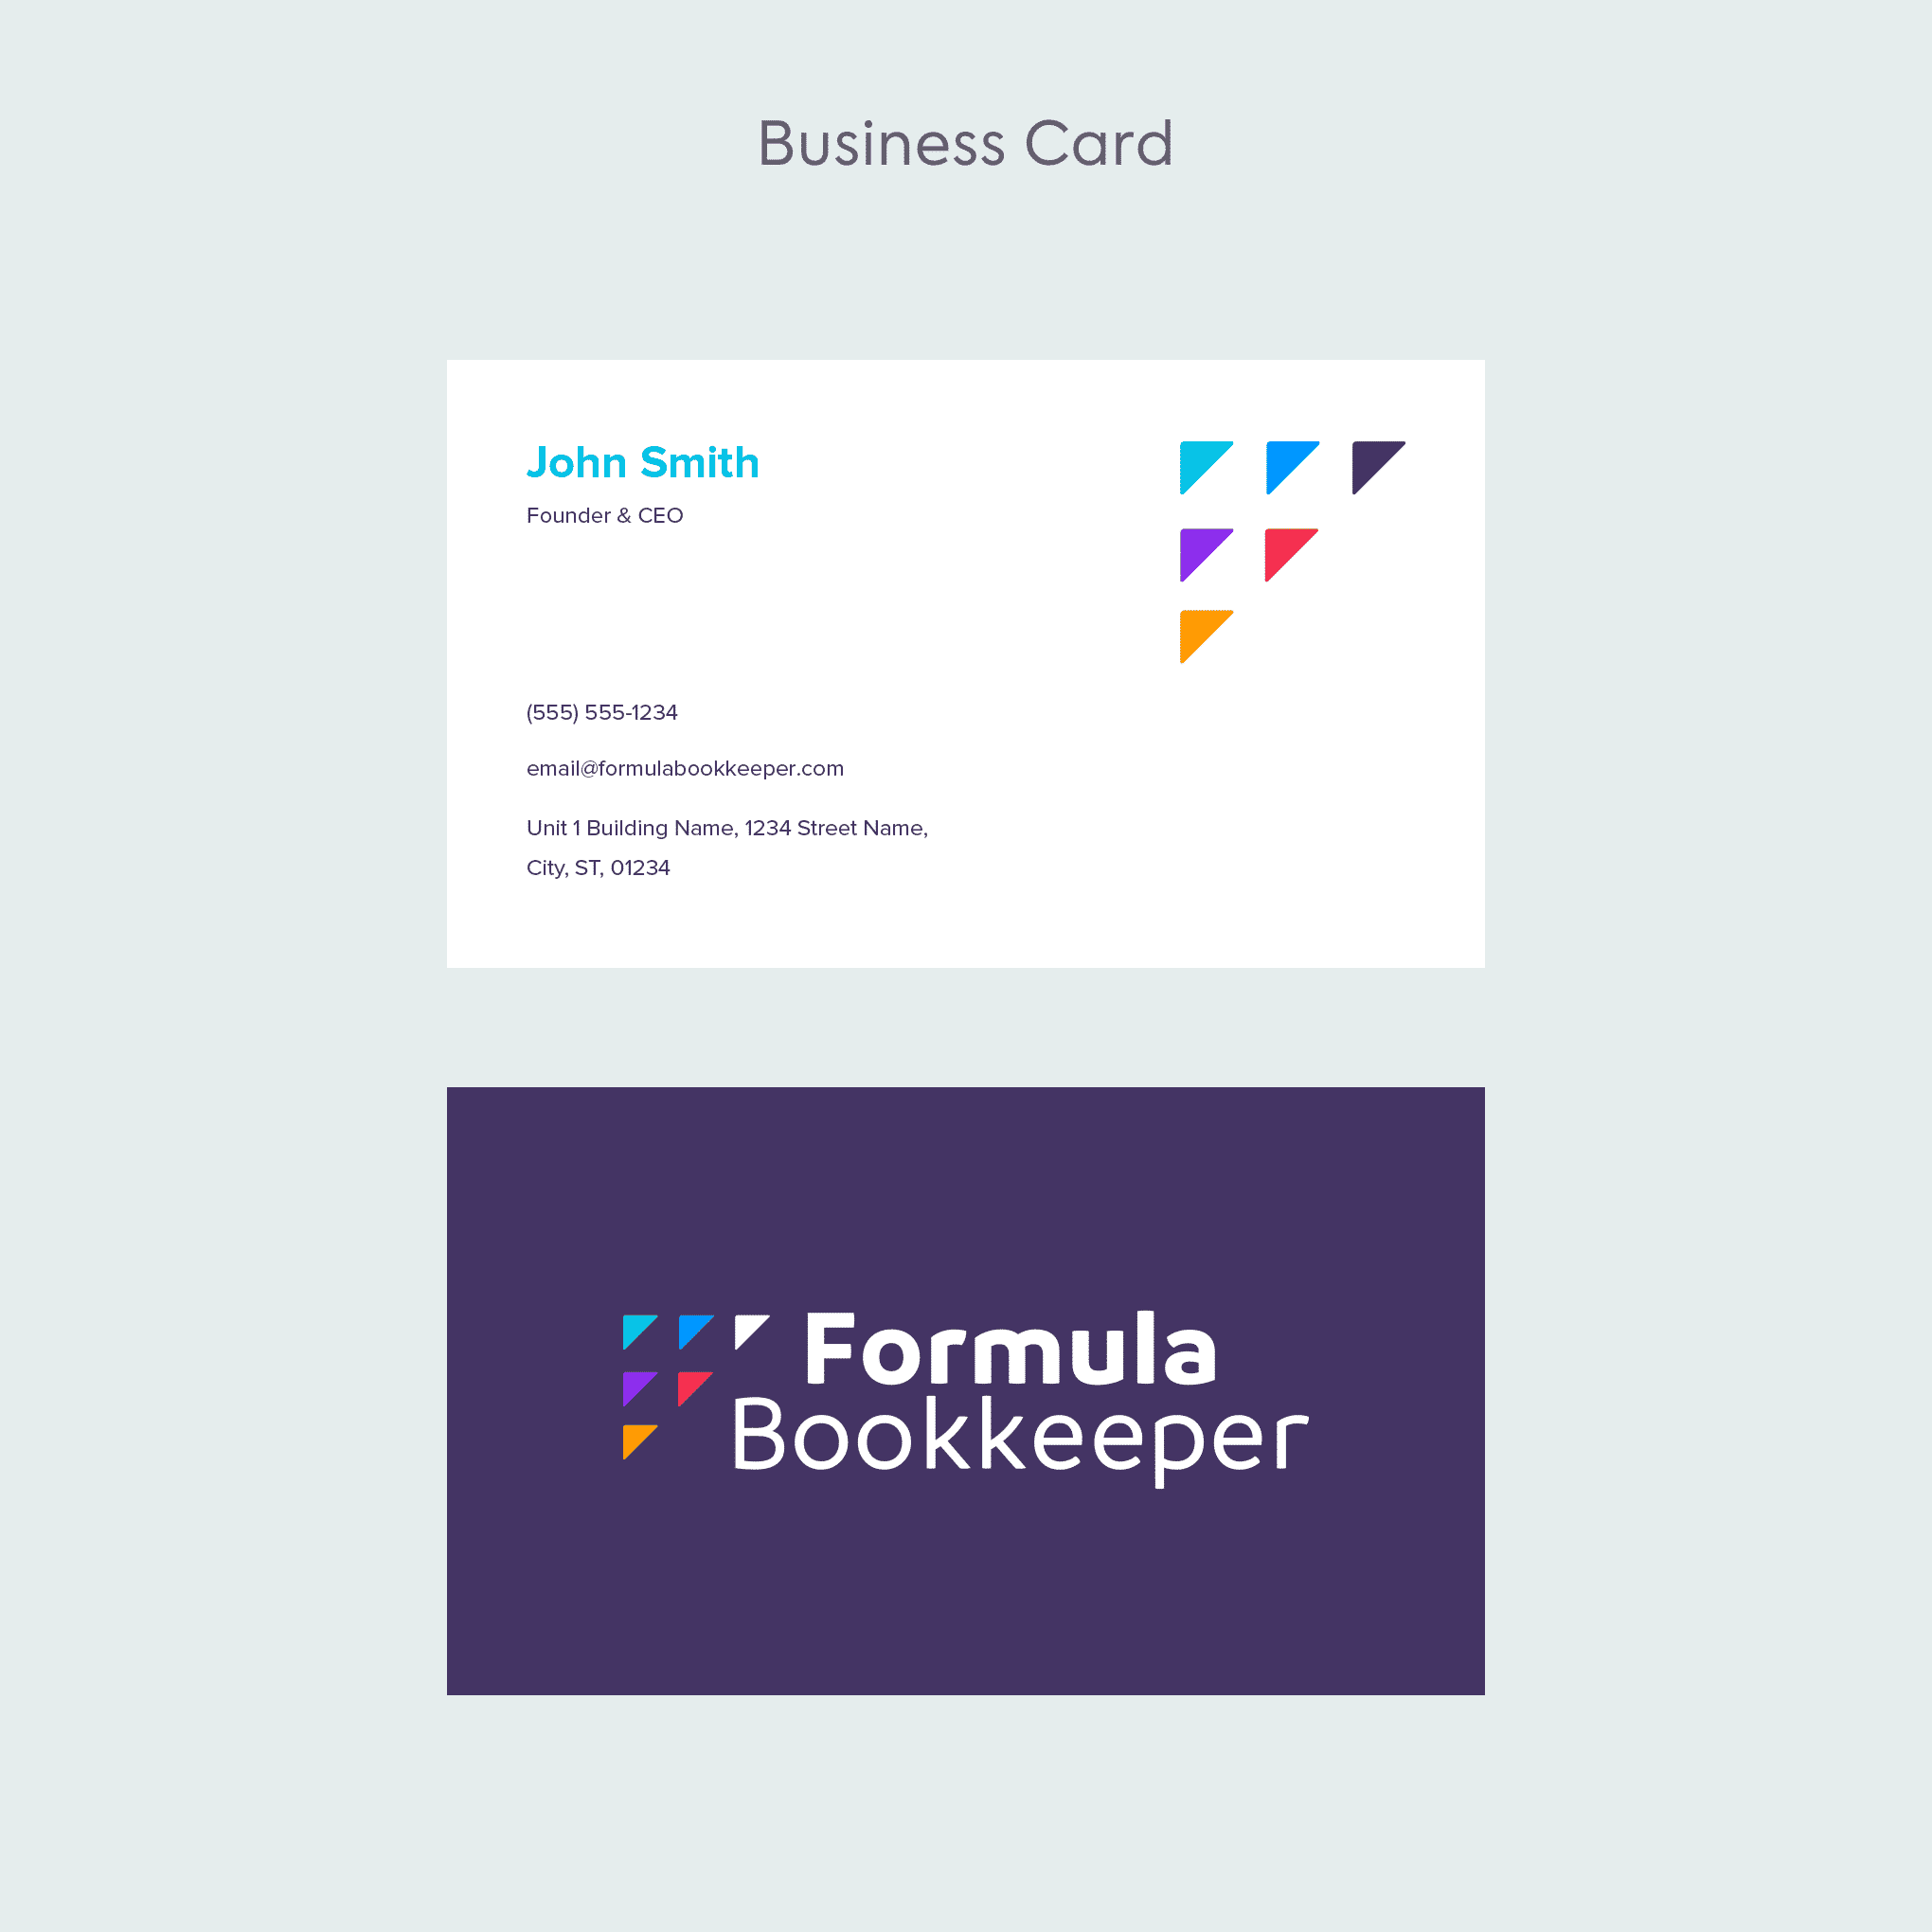 04 - Business Card Template (2)